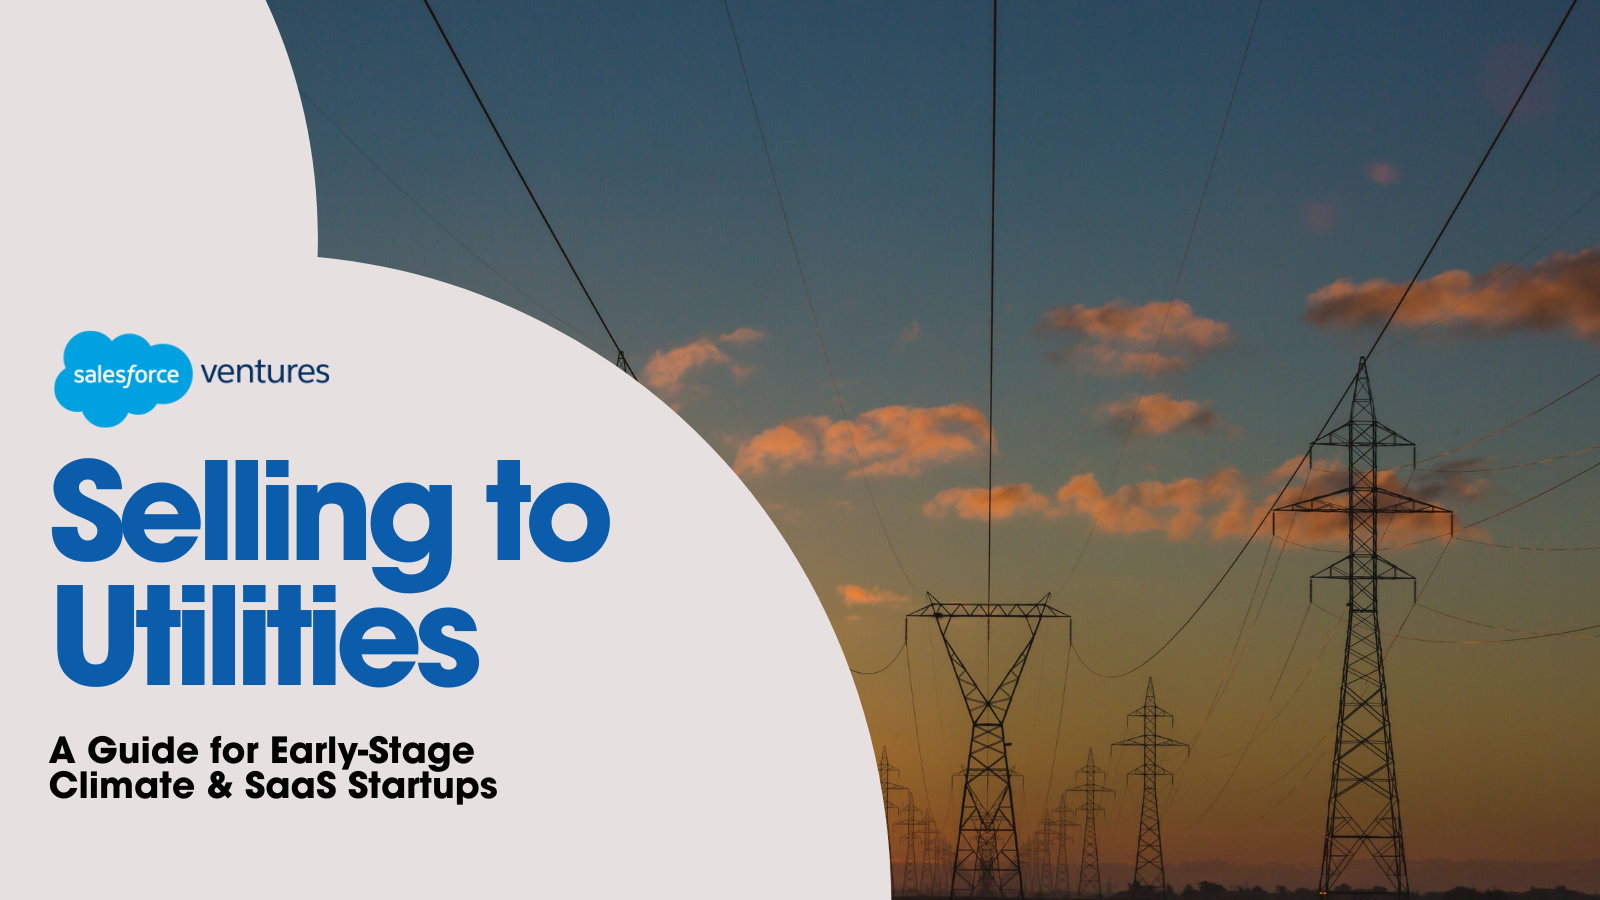 Selling to Utilities: A Guide for Early-Stage Climate & SaaS Startups